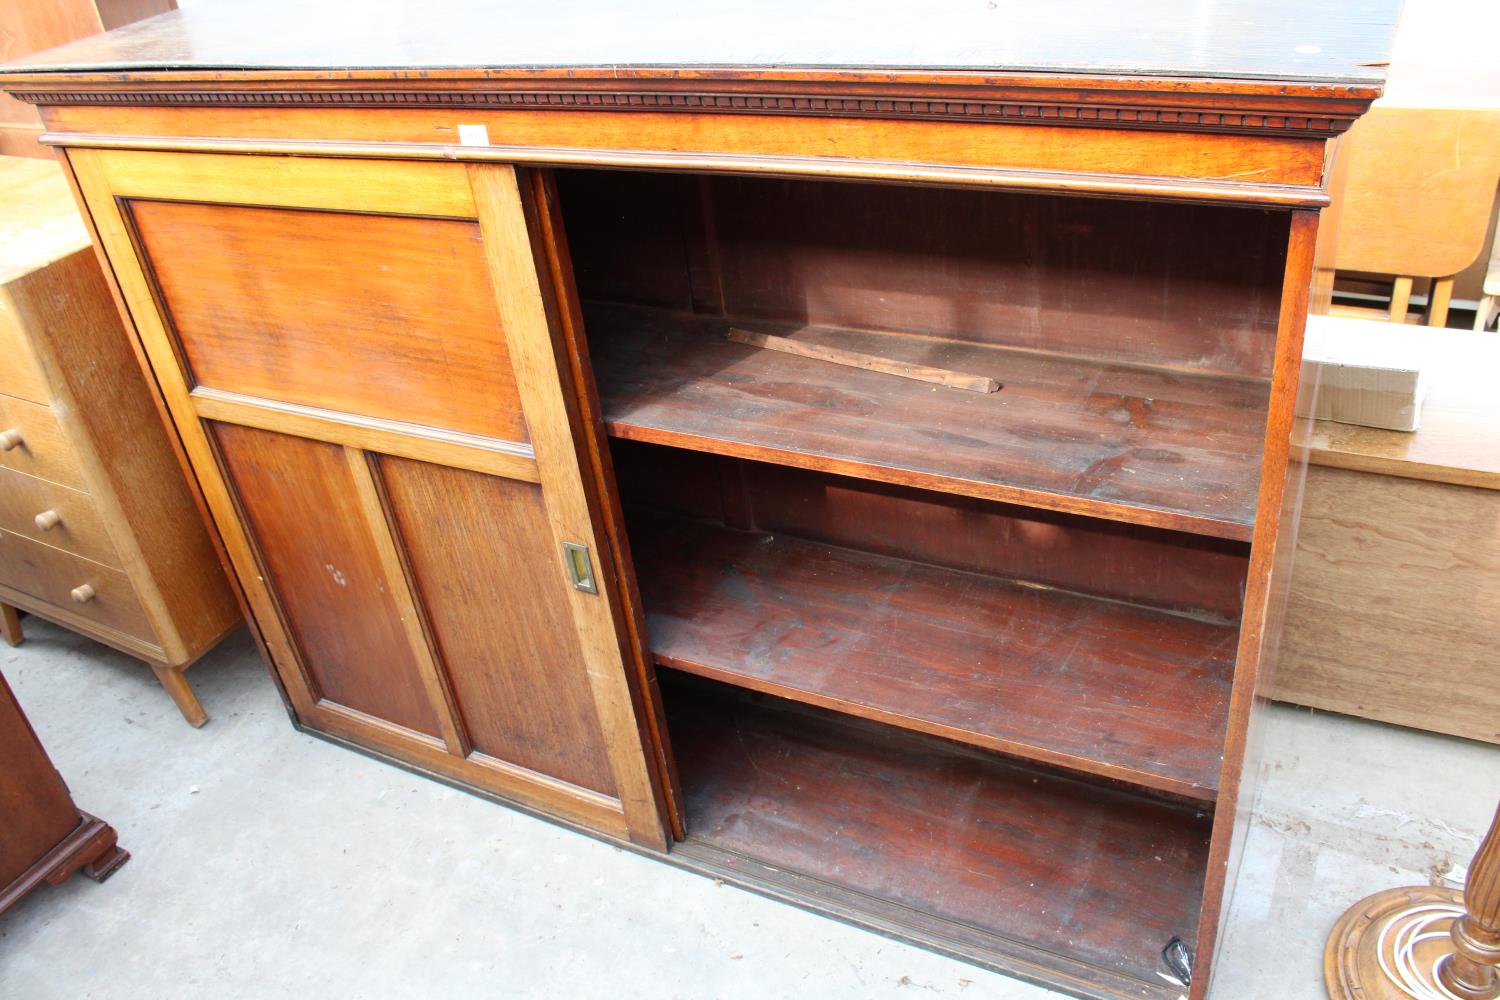 A VICTORIAN MAHOGANY STORAGE CABINET WITH TWO SLIDING DOORS HAVING SUNKEN BRASS HANDLES, 68" WIDE - Image 3 of 3